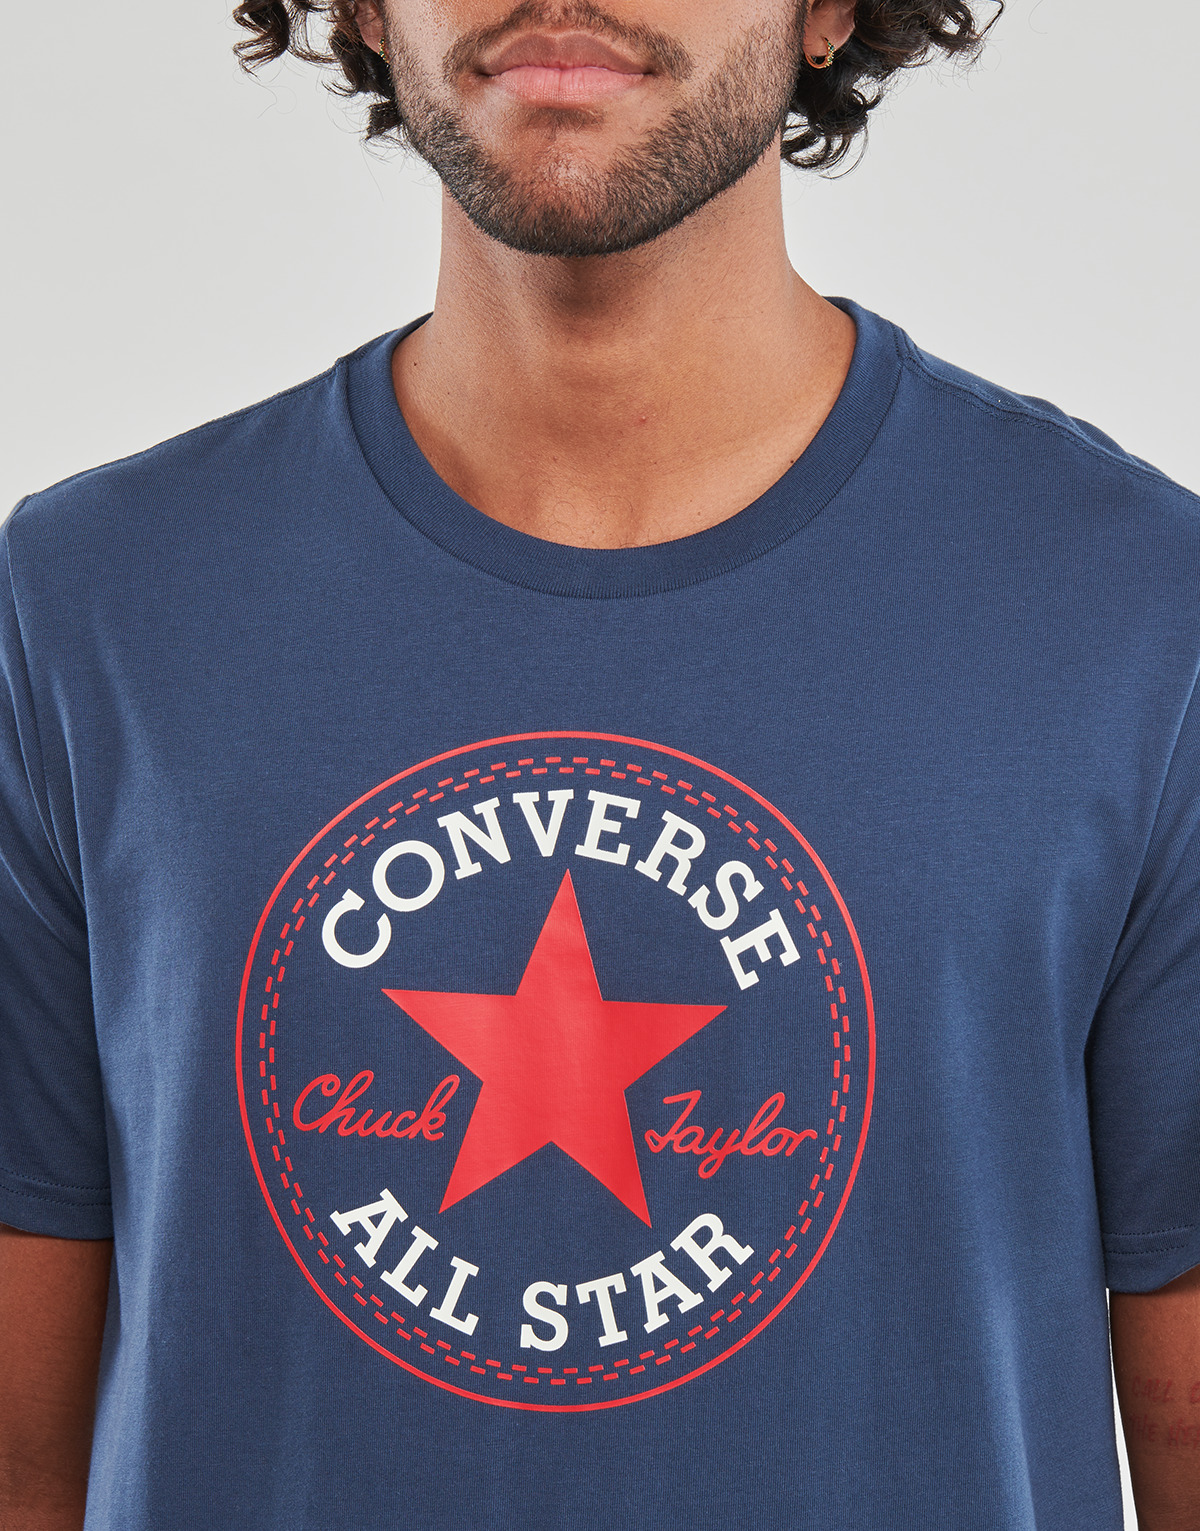 Converse Marine GO-TO ALL STAR PATCH T-SHIRT CoLlhArh